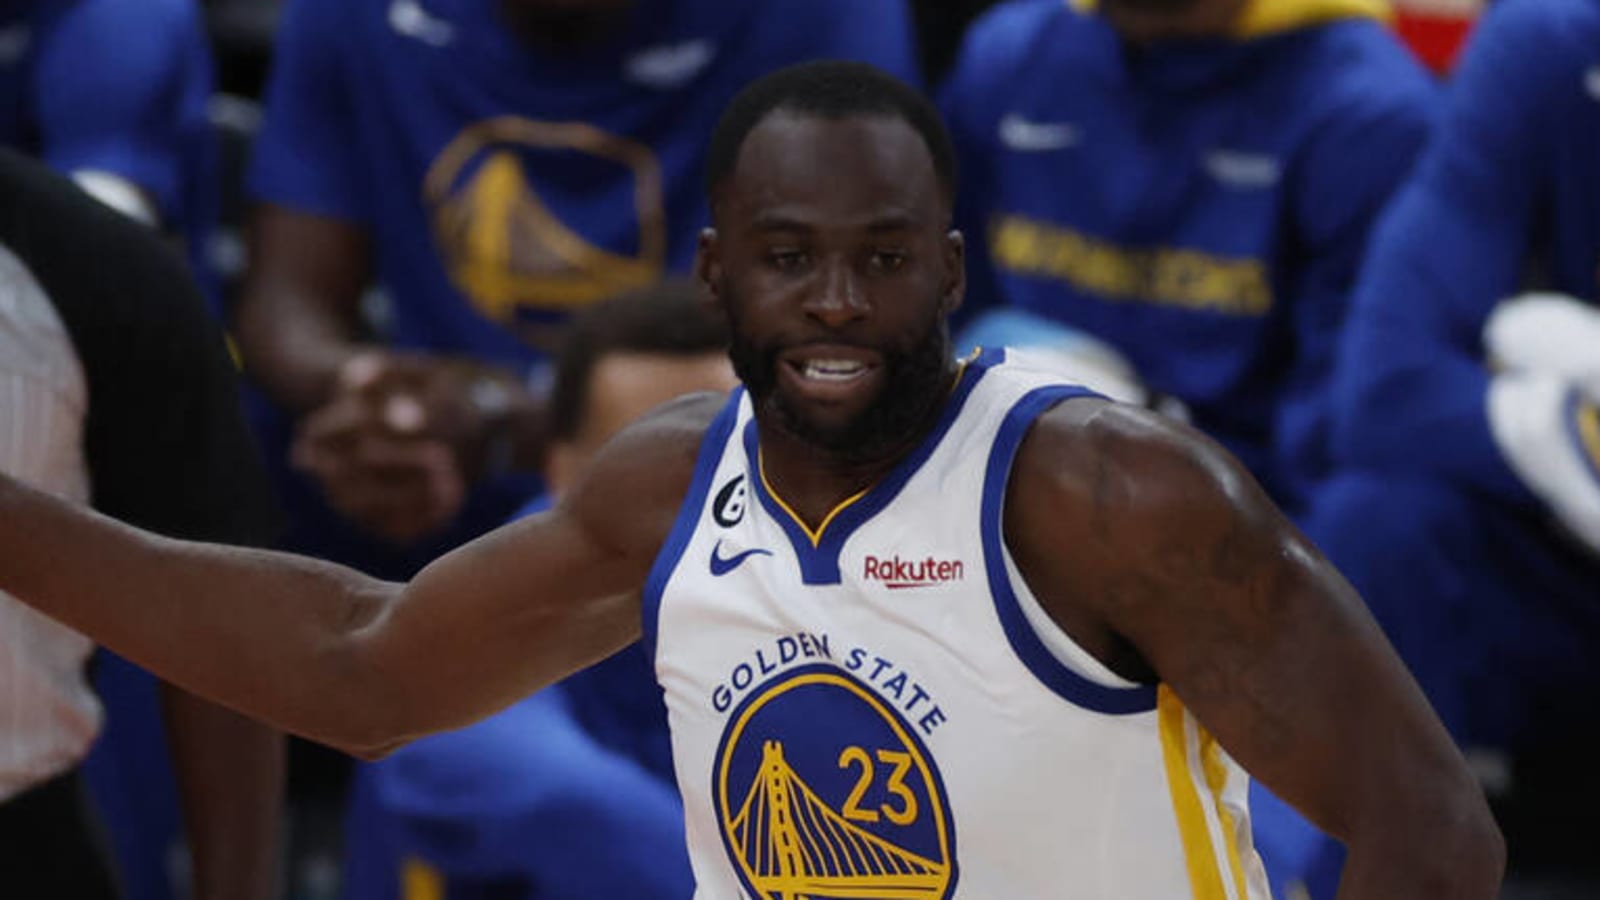 Draymond could be disciplined for 'altercation' with Jordan Poole